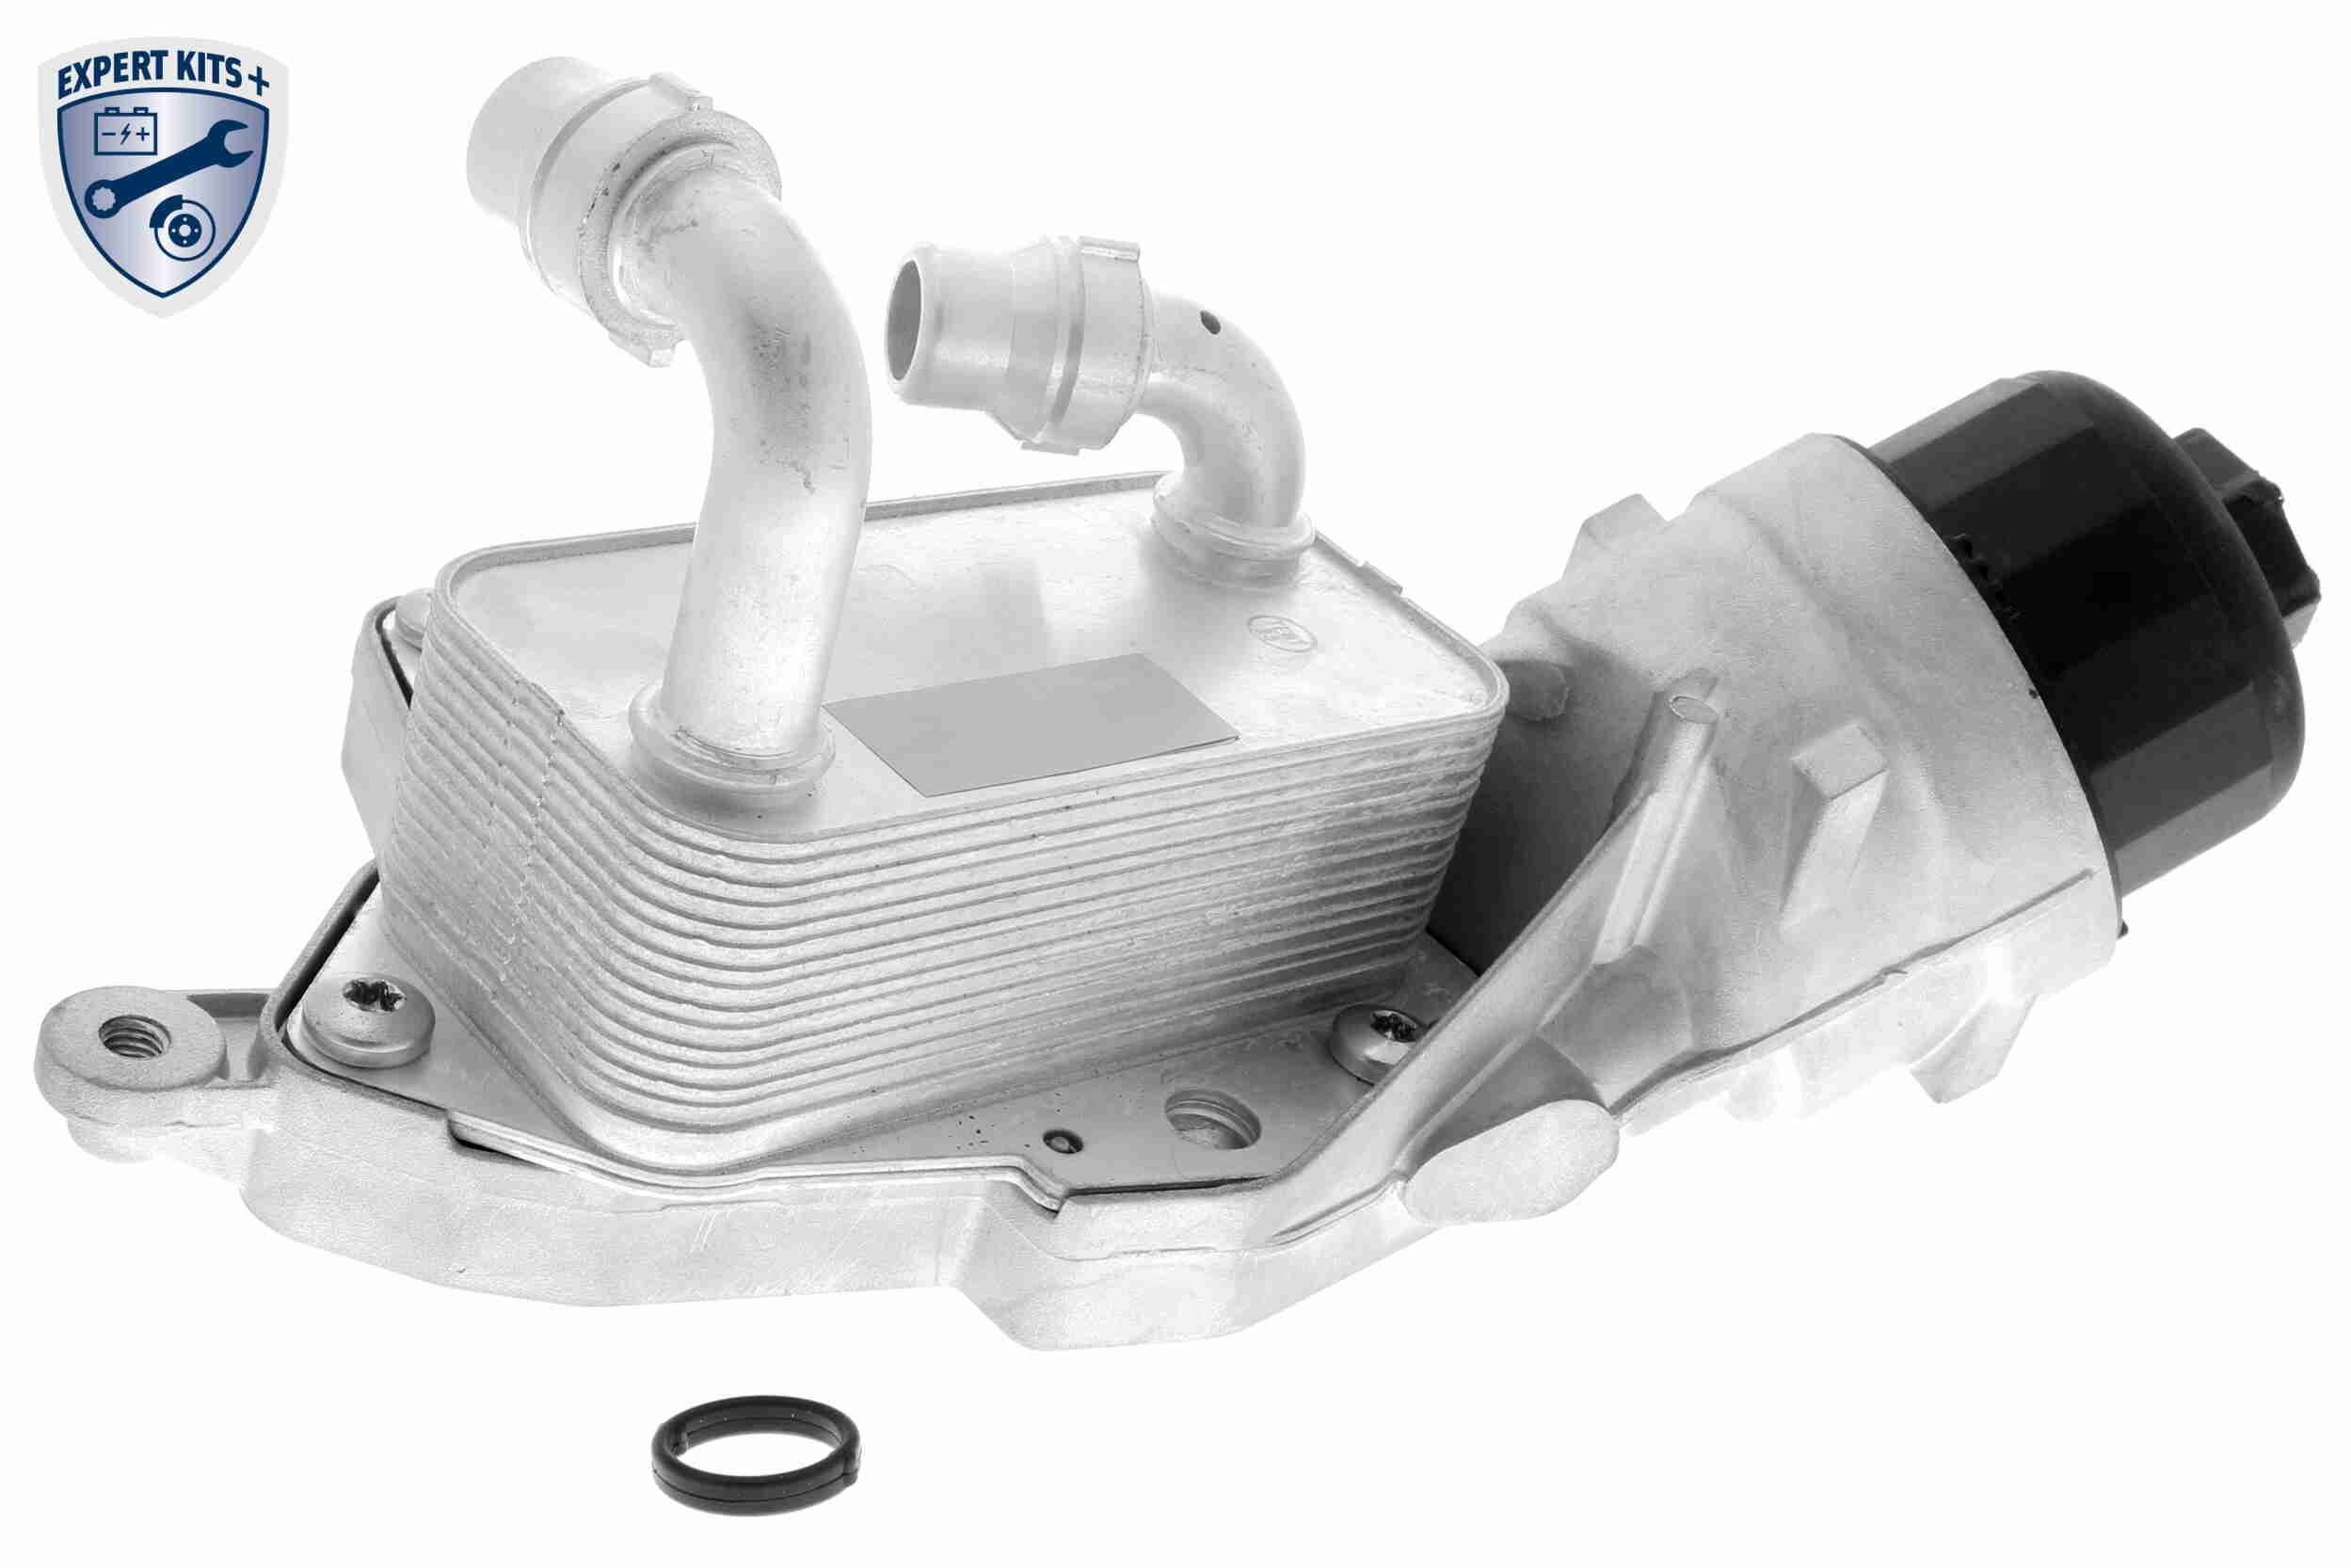 VEV40-60-2100-1 - 55 5 VEMO with seal, with oil filter housing Oil cooler V40-60-2100-1 buy